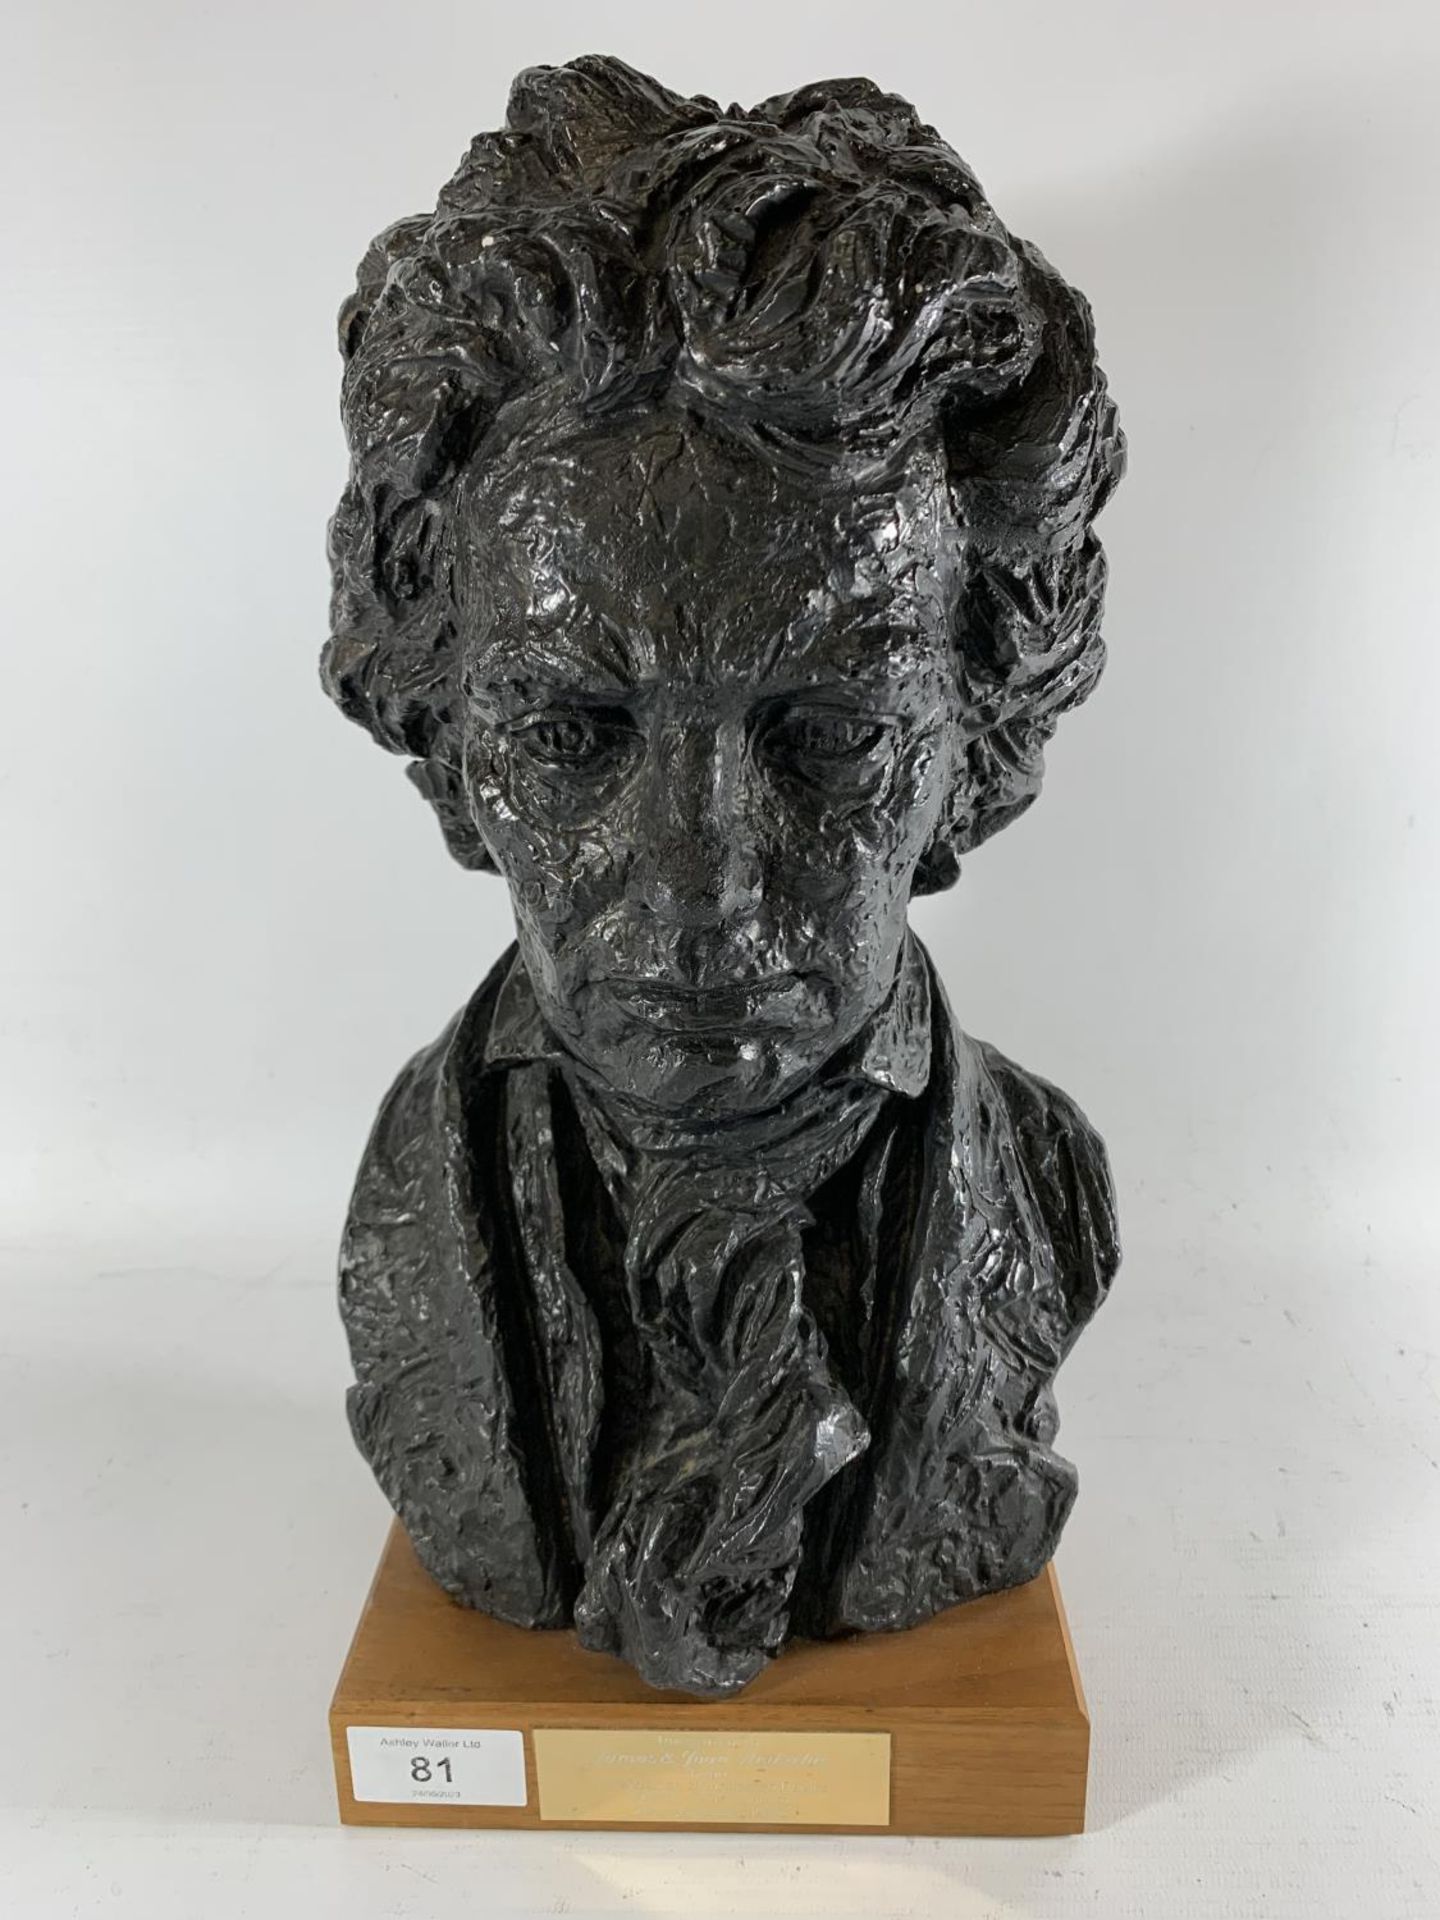 * A PRESENTATION PAINTED PLASTER BUST OF LUDWIG VAN BEETHOVEN, MOUNTED ON WOODEN BASE, HEIGHT 35.